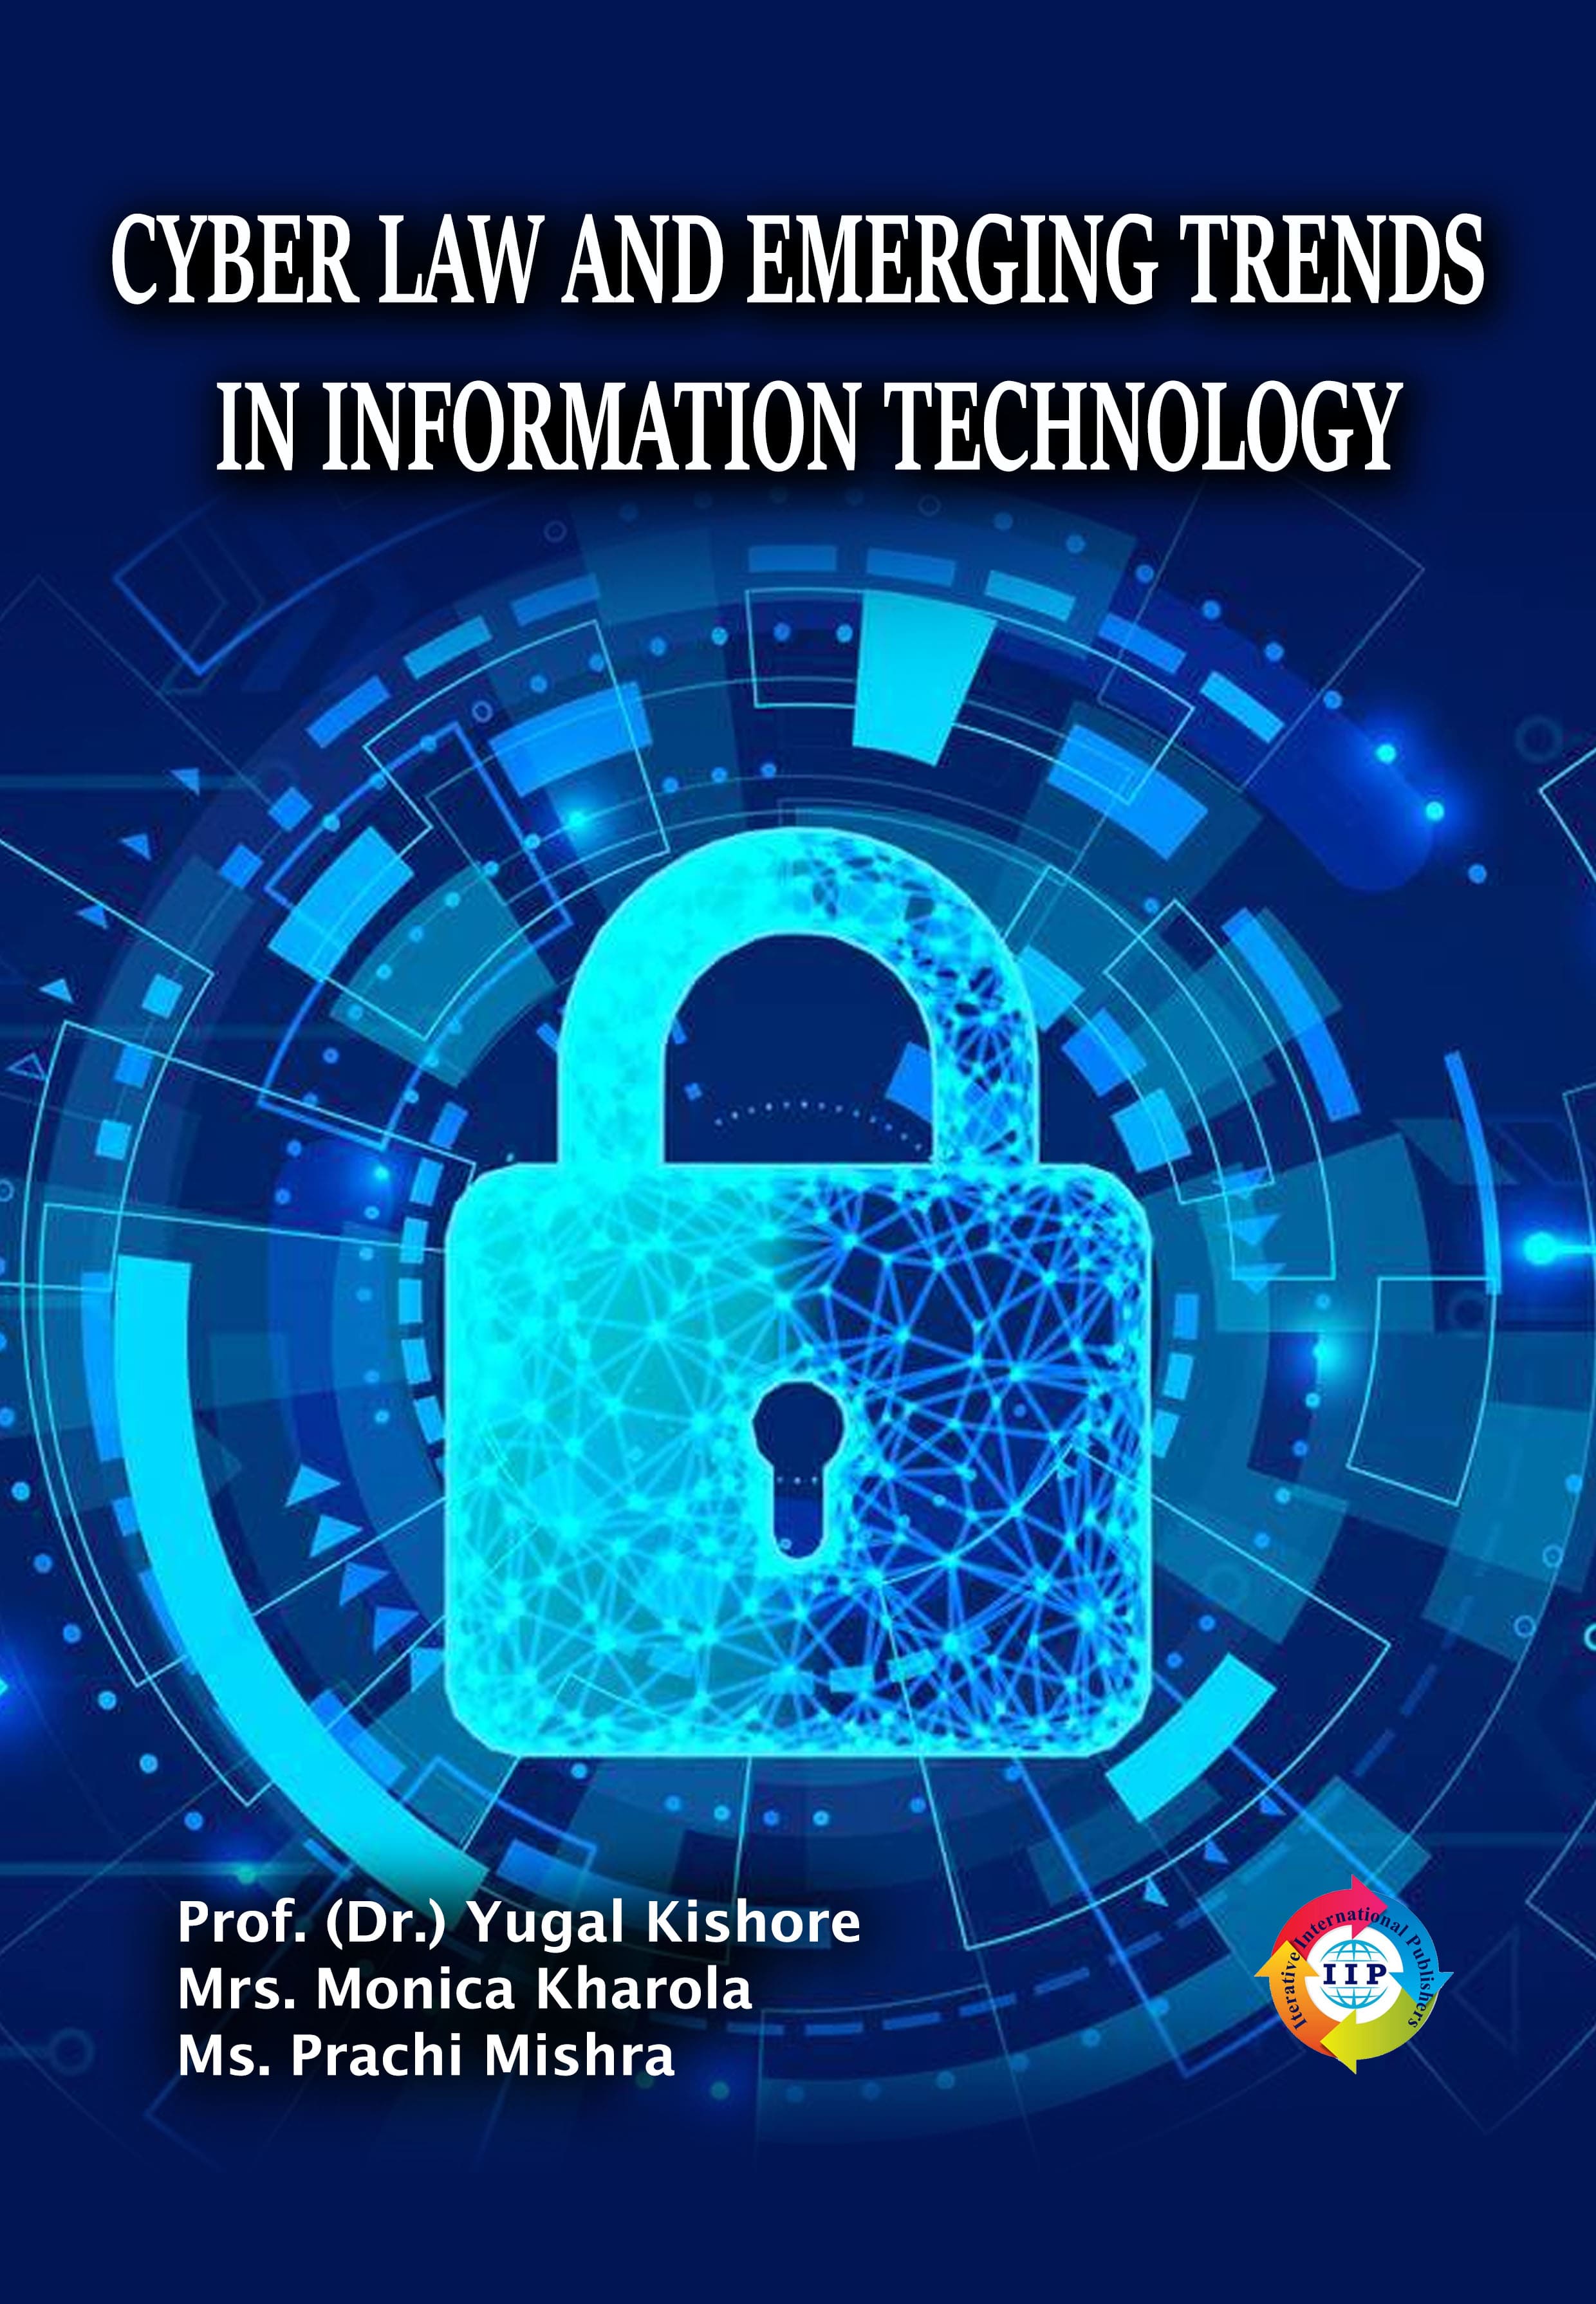 CYBER LAW AND EMERGING TRENDS IN INFORMATION TECHNOLOGY